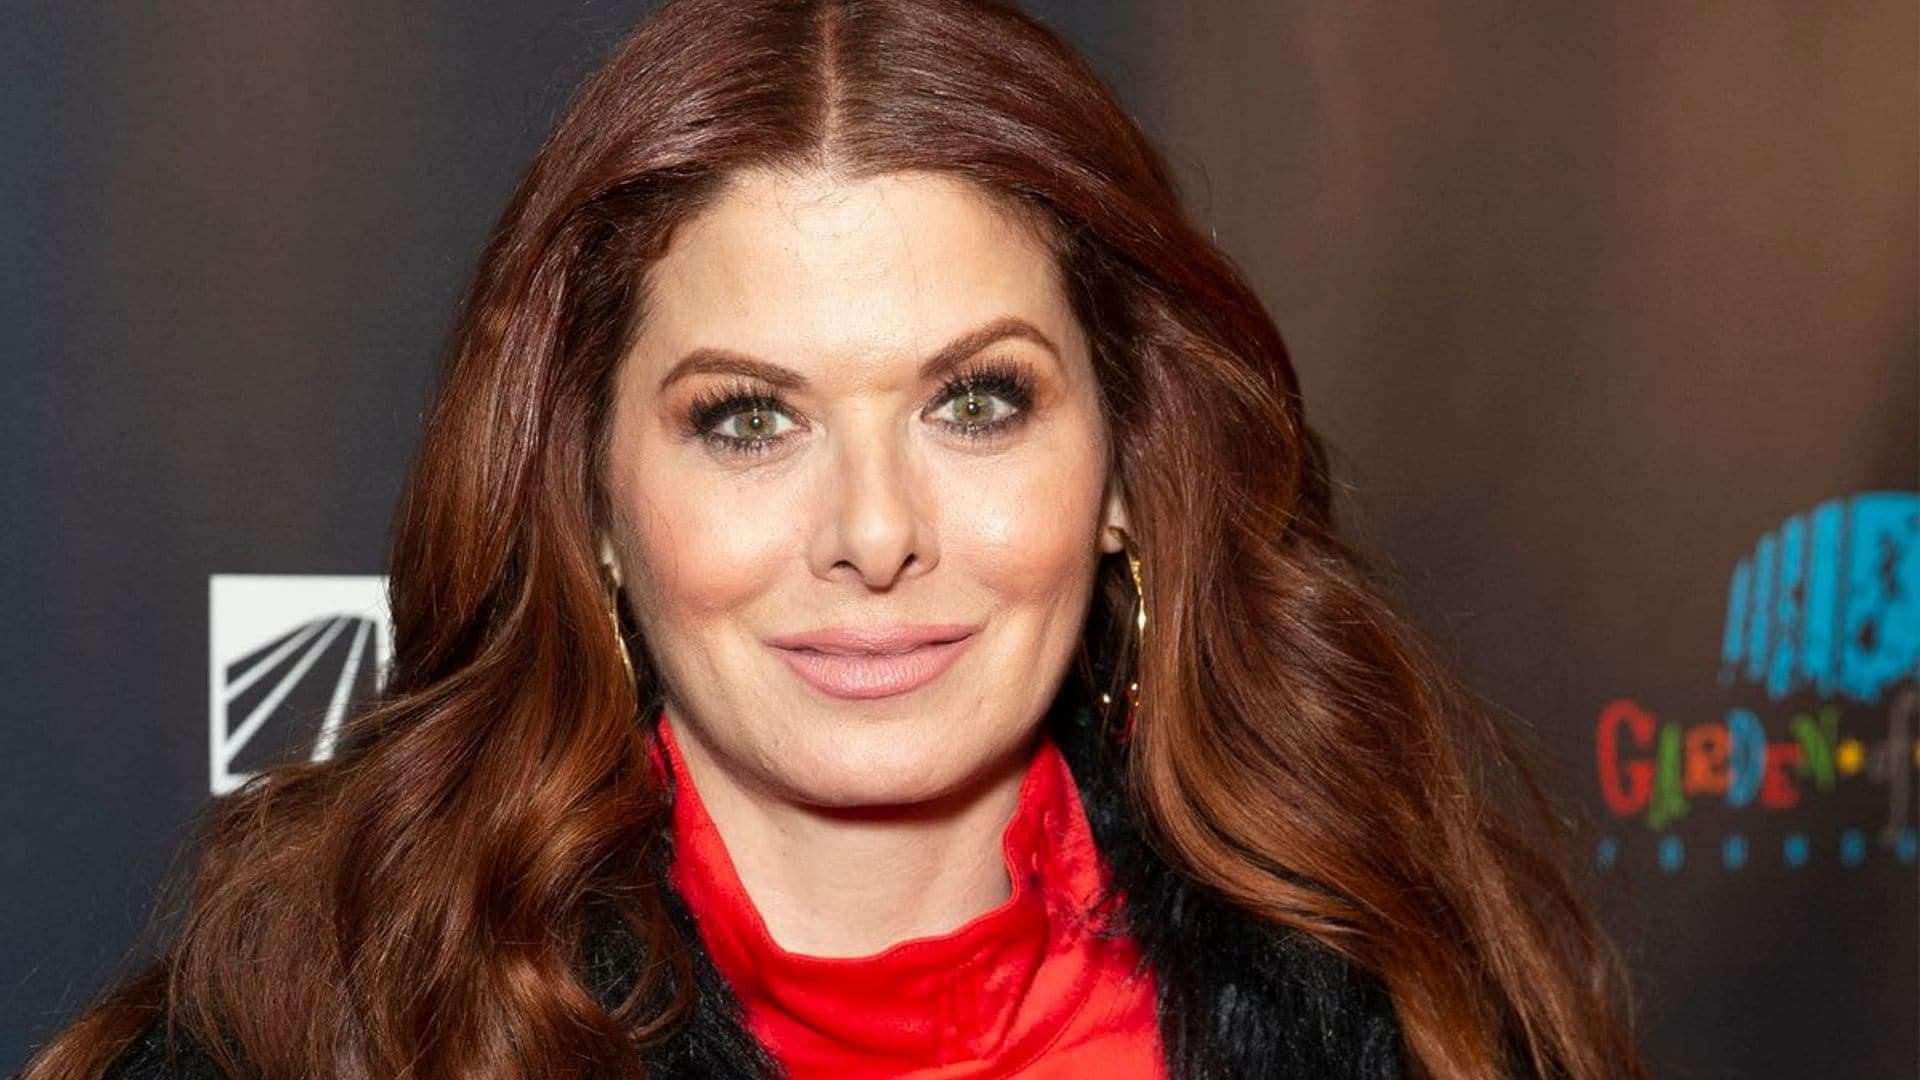 Fans can’t believe that Debra Messing wasn’t chosen to play Lucille Ball in a new film